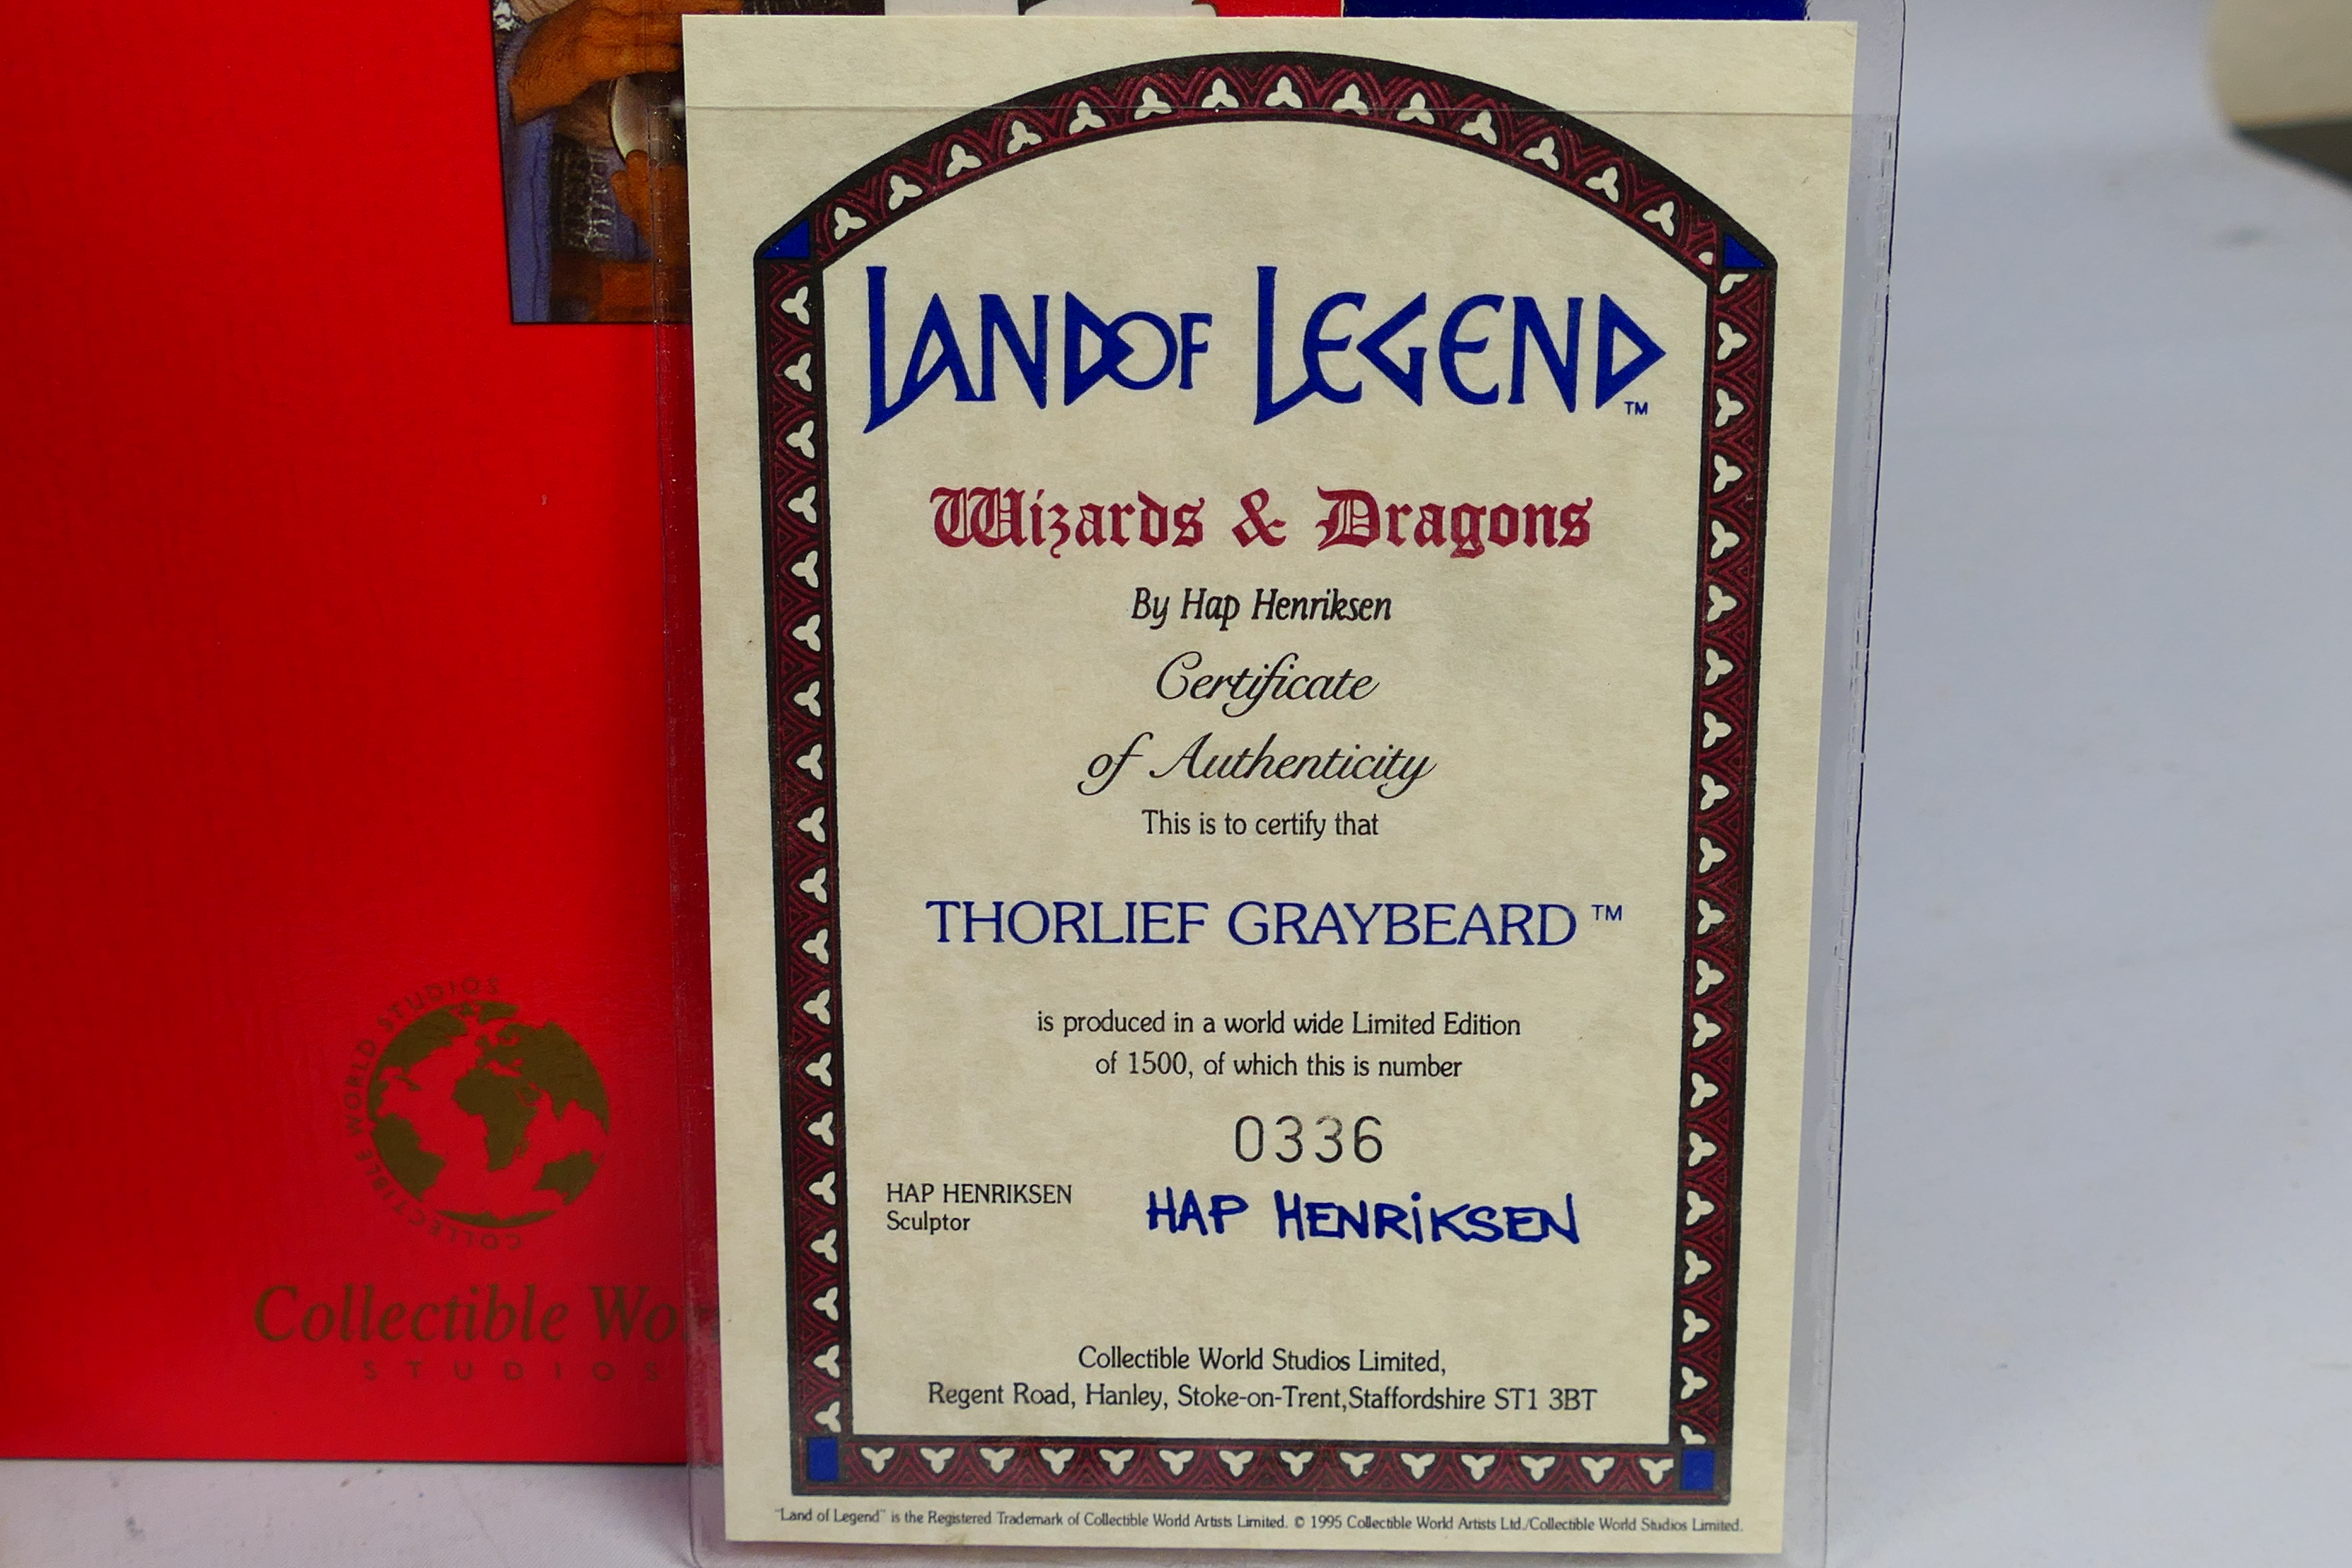 Wizards & Dragons - Two boxed limited edition Land Of Legend fantasy figures designed by Hap - Image 7 of 7